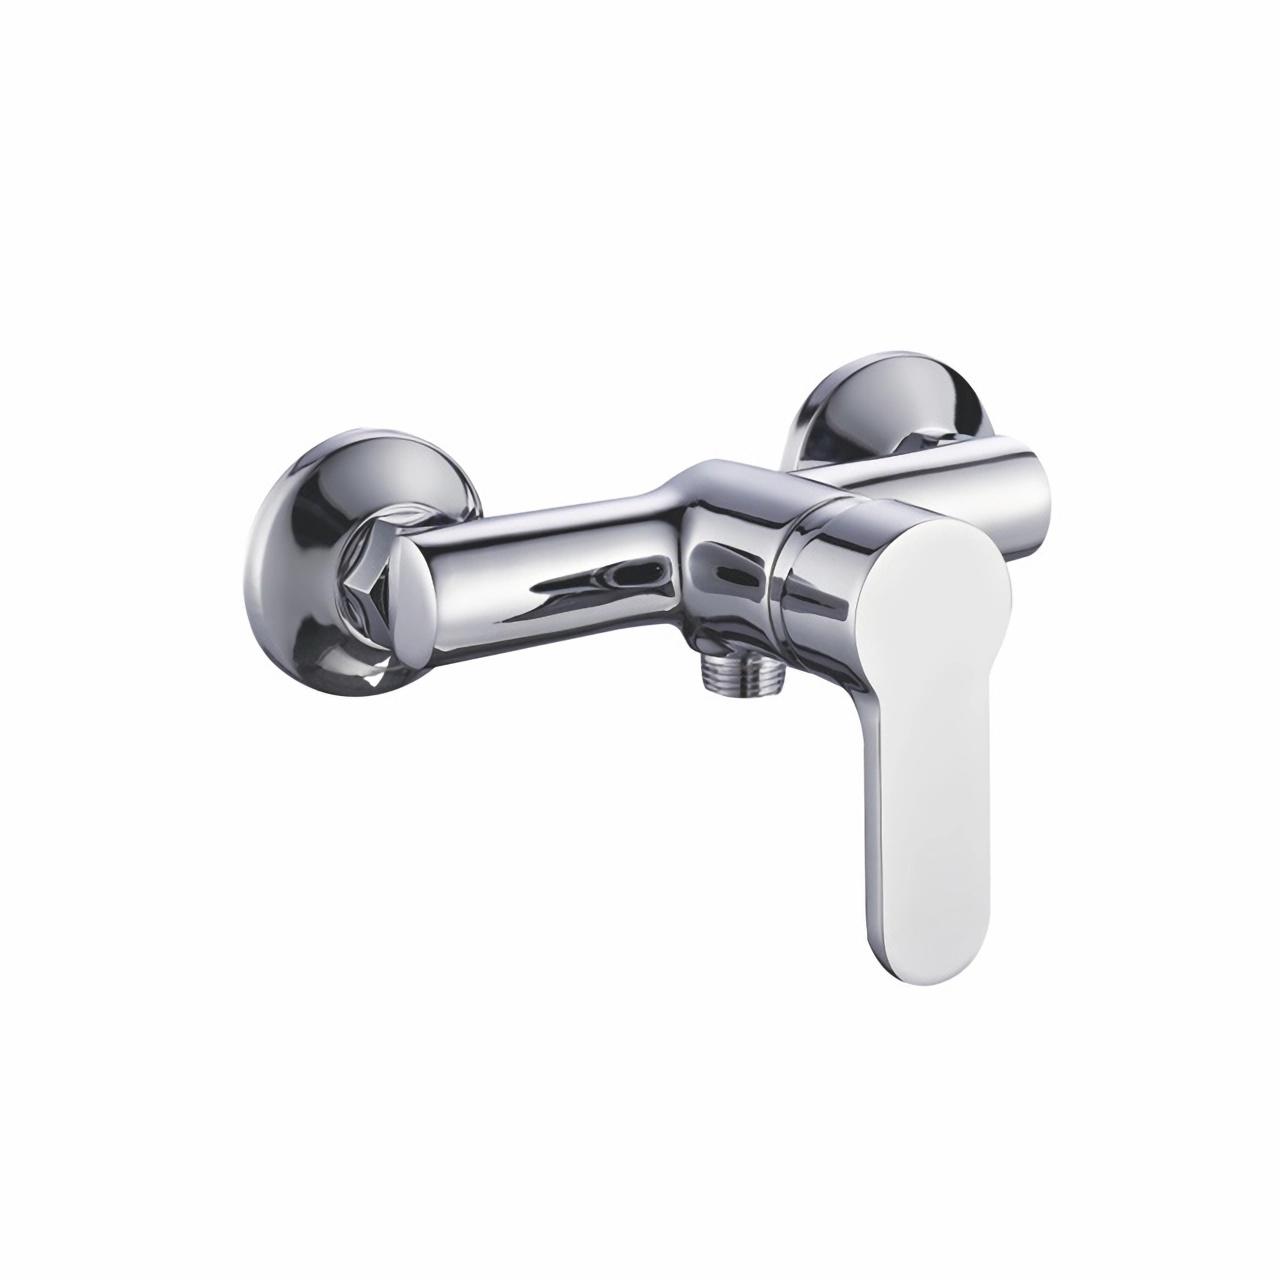 OJ-J2204H Wall-Mounted Chrome Plated Single Handle Faucet Hot and Cold Water Mixing Shower Mixer Tap Zinc Alloy Shower Faucet